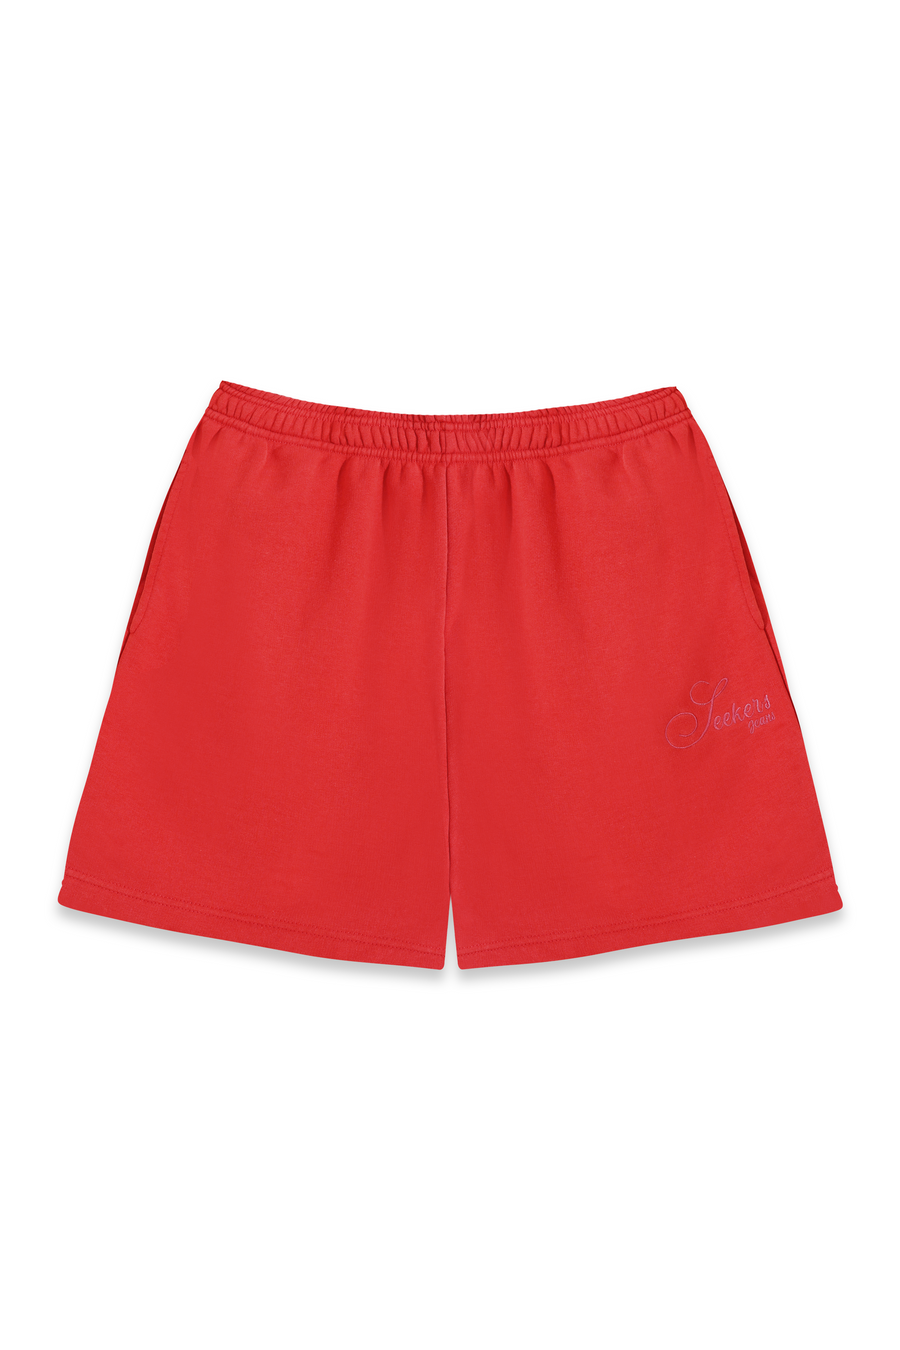 Seekers Washed Sweat Shorts in Jam